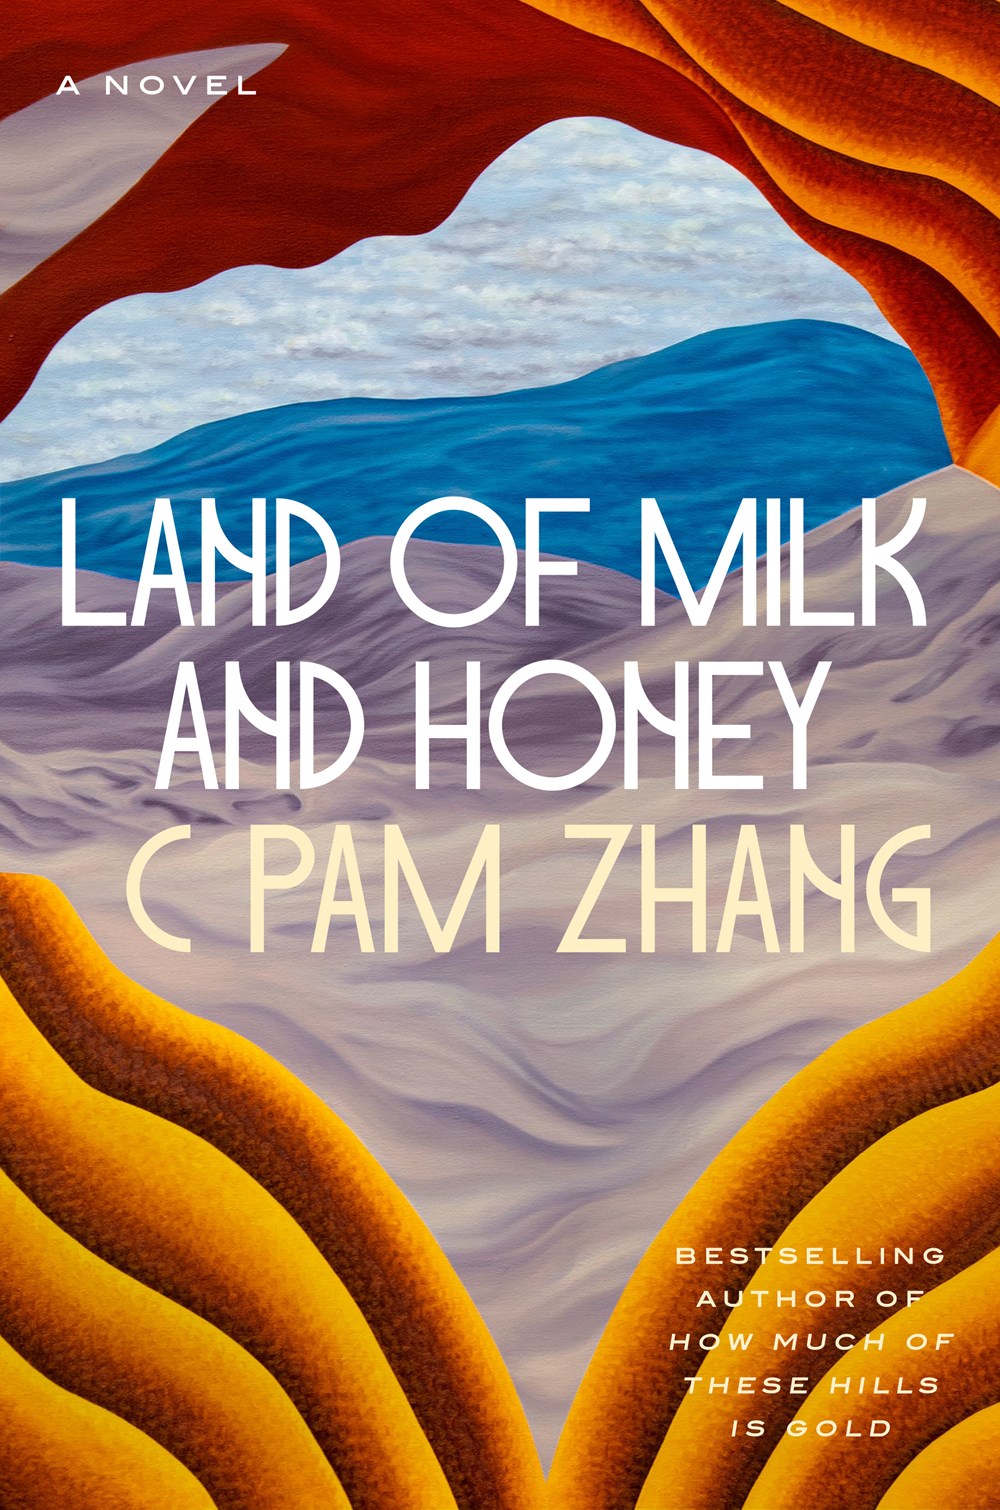 Land of Milk and Honey by C Pam Zhang (Hardcover)